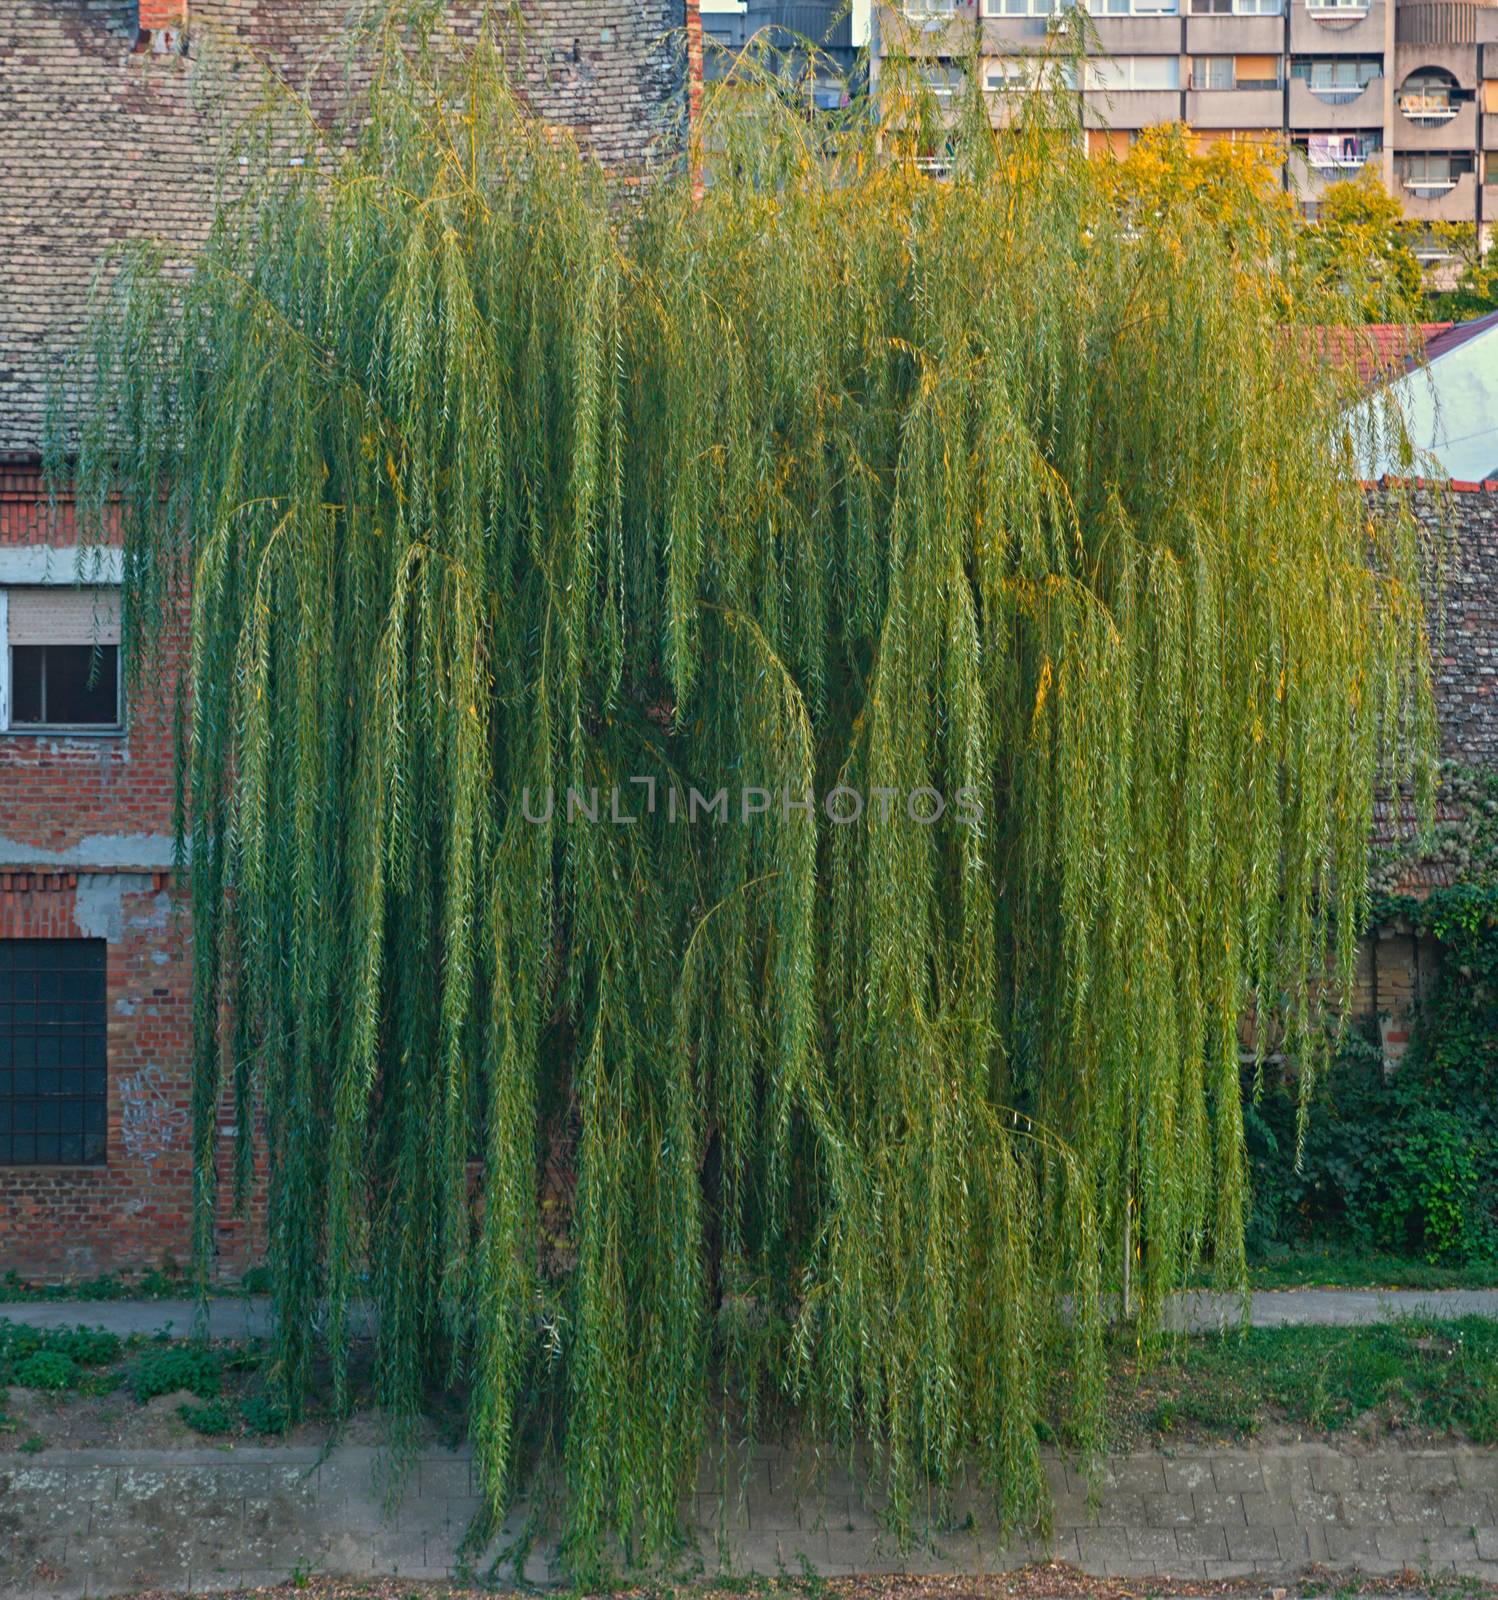 Large Willow tree in front of a house